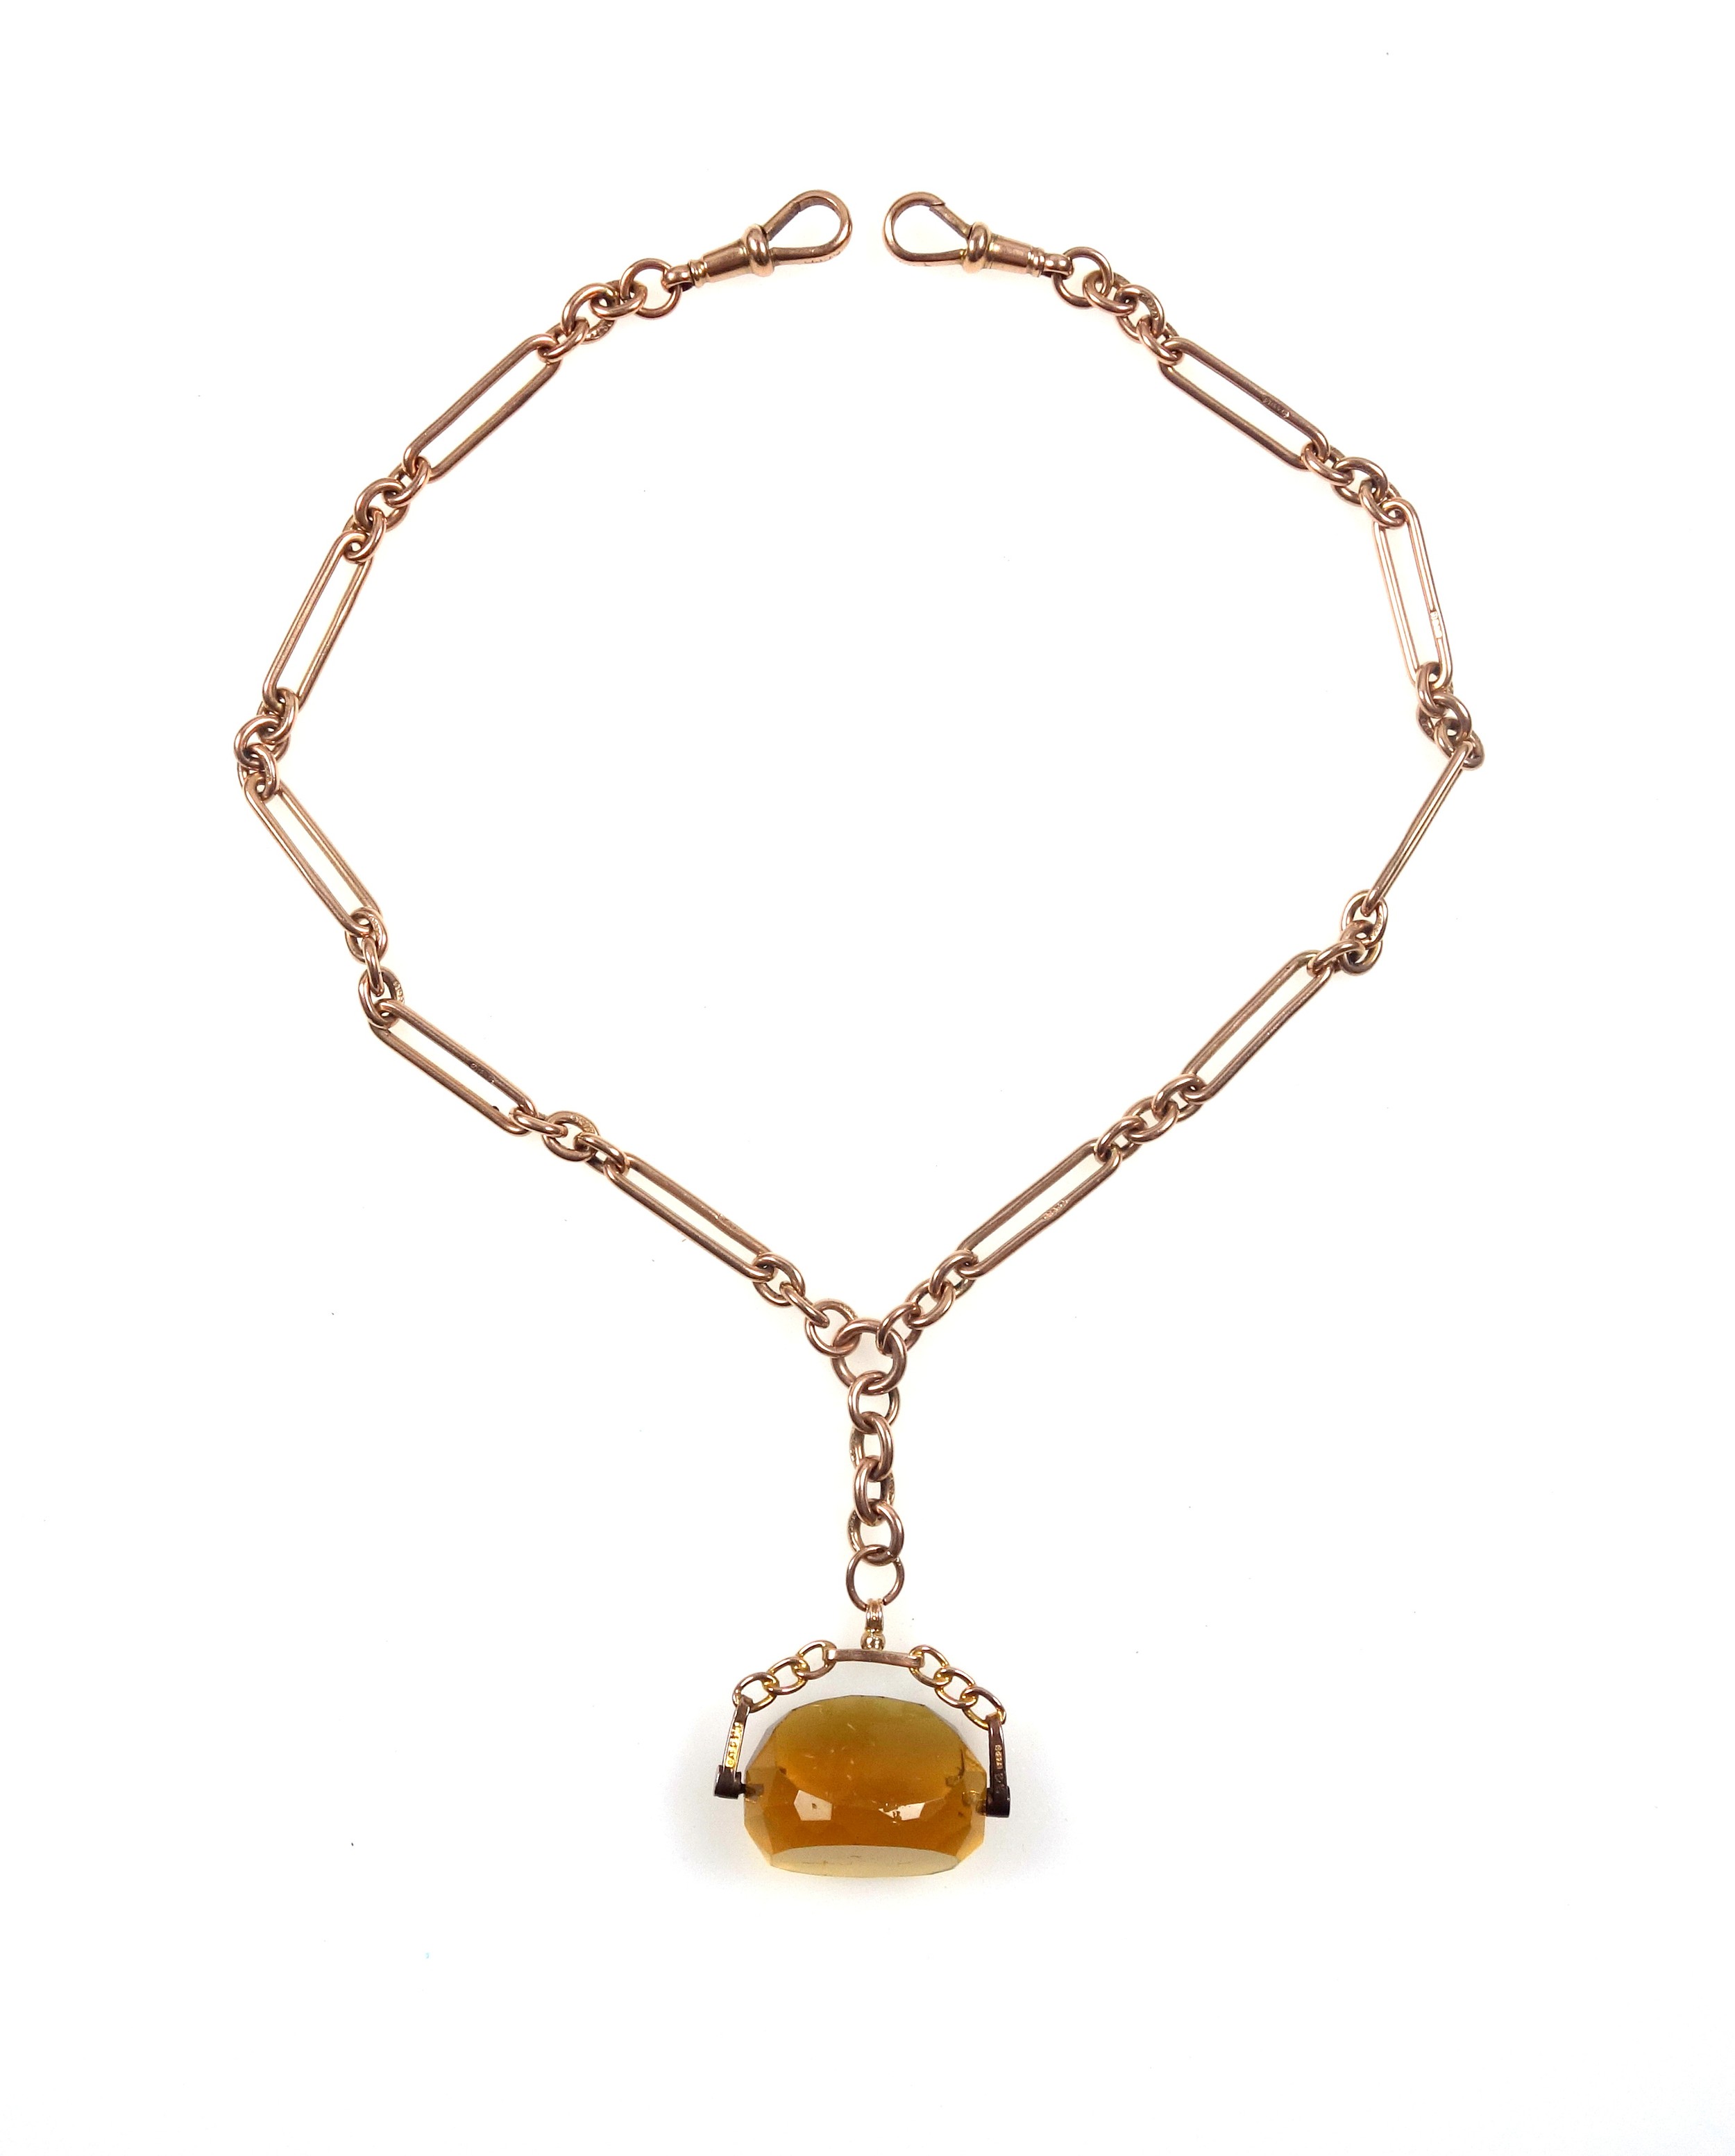 9ct gold Figaro belcher chain with two 'dog collar' clasps together with a 9ct gold citrine fob,